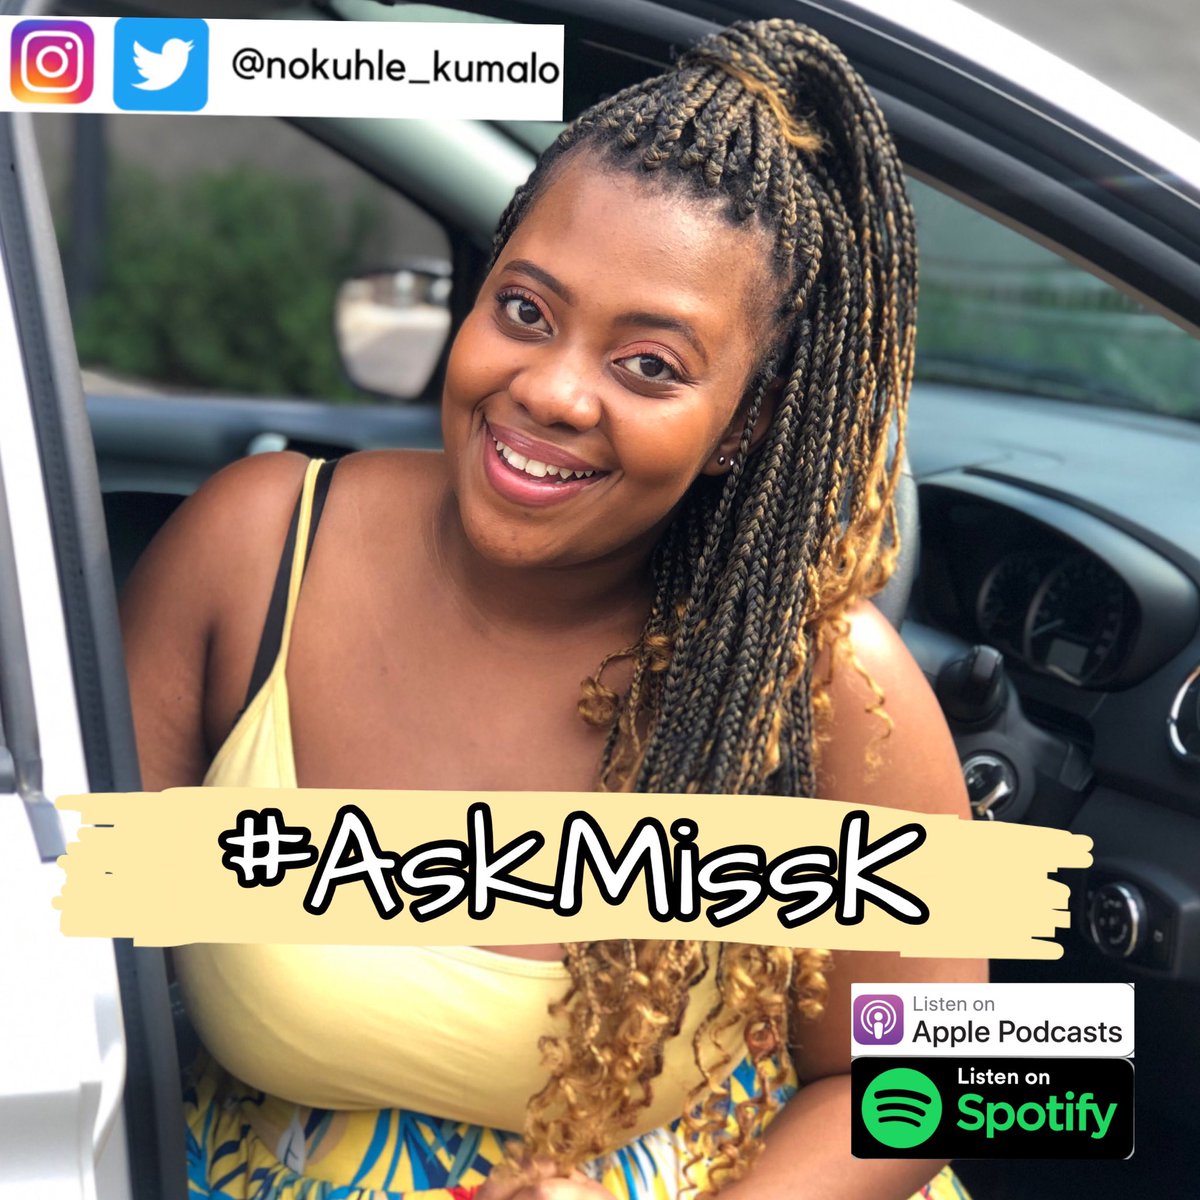 Celebrating 2 milestones today 🏆🙏🏾.

> 9K subscribers on YouTube 🎥 

> Dropped my 1st podcast “episode” 🎙🥺. #AskMissK 

Thank you for all the continuous support you guys have shown me ❤️. Kwande 🙏🏾.

[ Podcast available on YouTube, Apple & Spotify ]

linktr.ee/nokuhle_kumalo